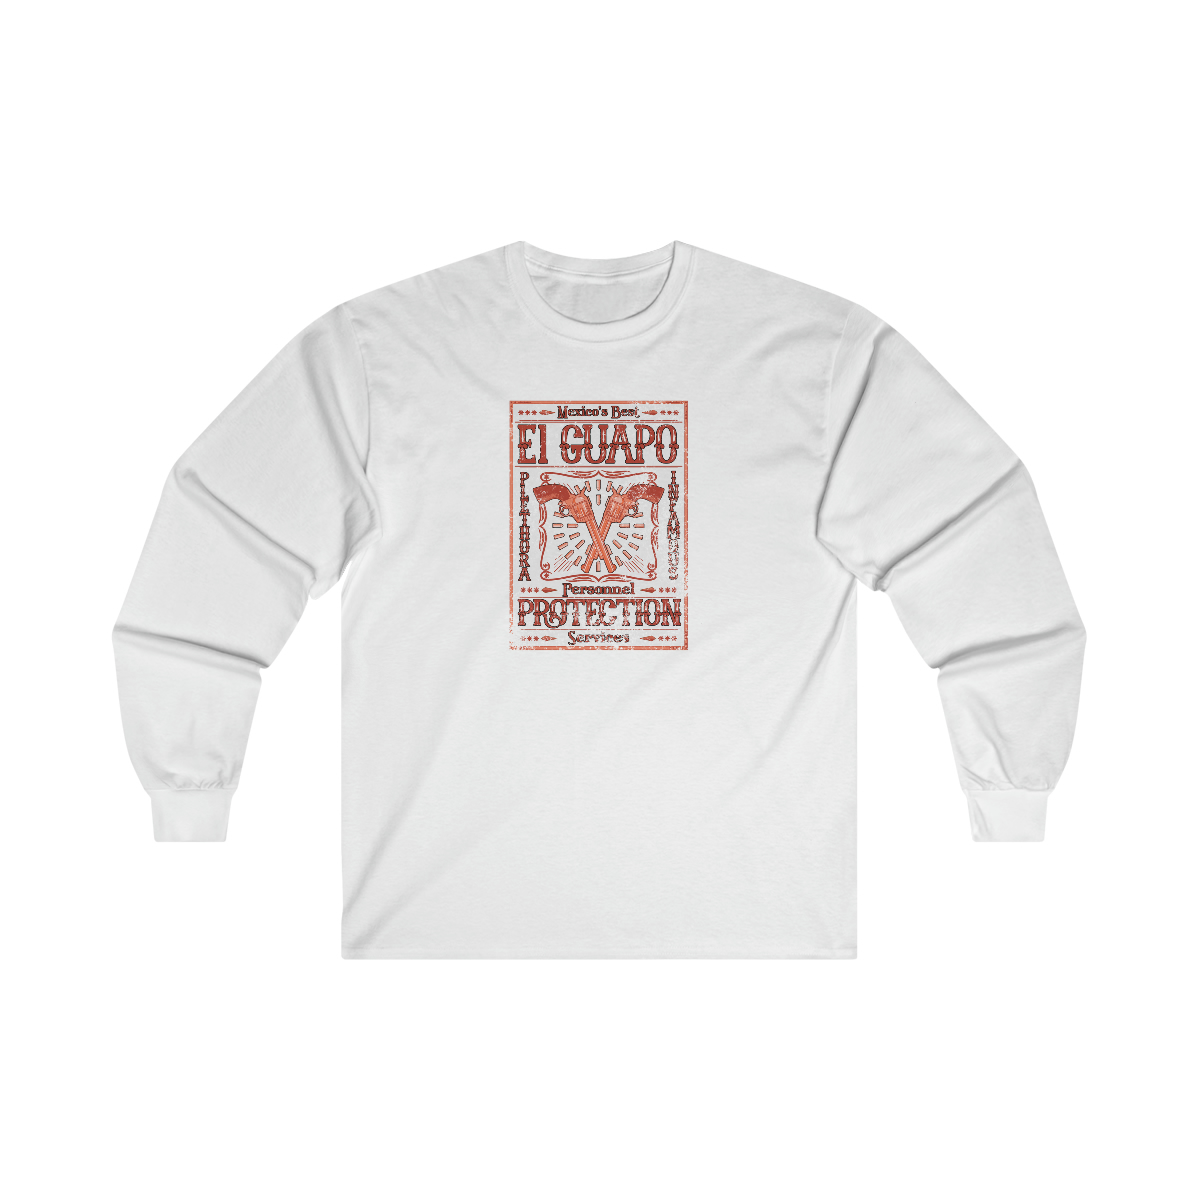 Personnel Protection (orange) - Unisex Ultra Cotton Long Sleeve Tee